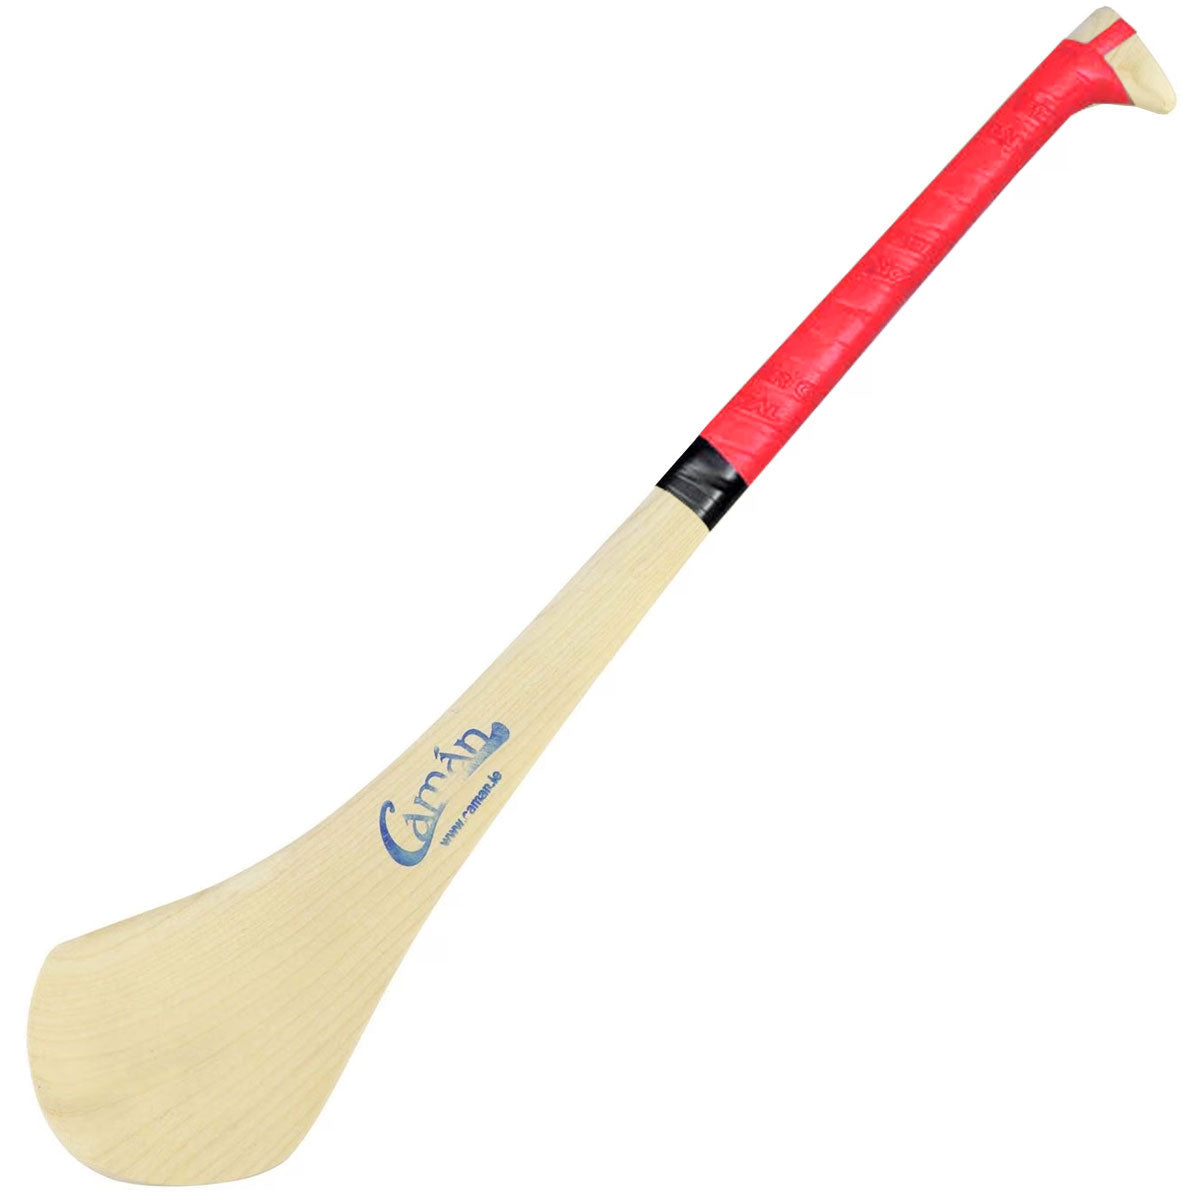 Caman Hurling Stick size 32 (Inches)